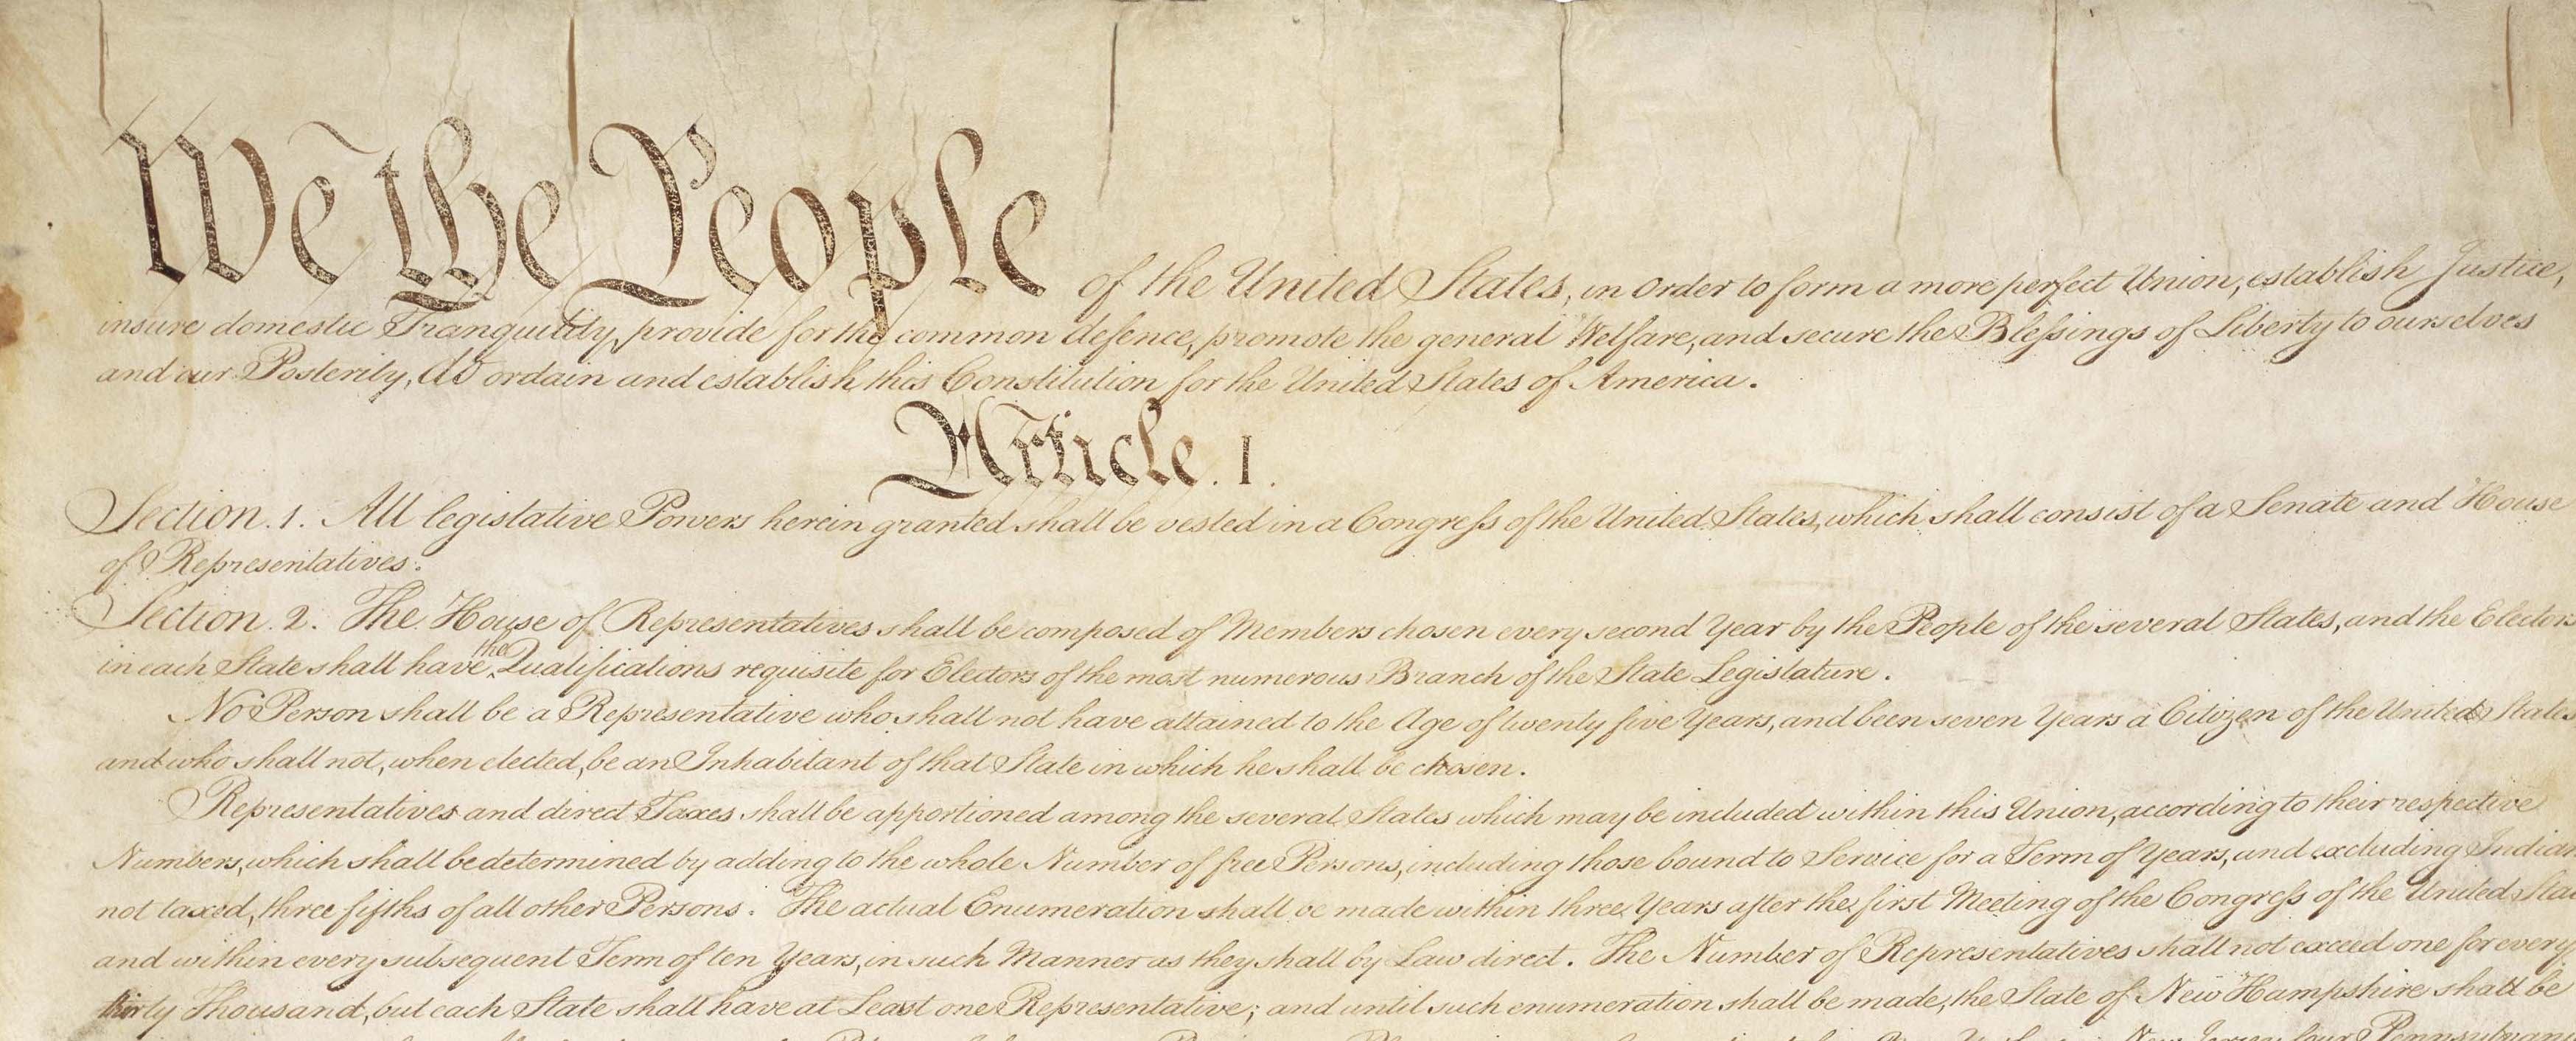 The Constitution of the United States of America